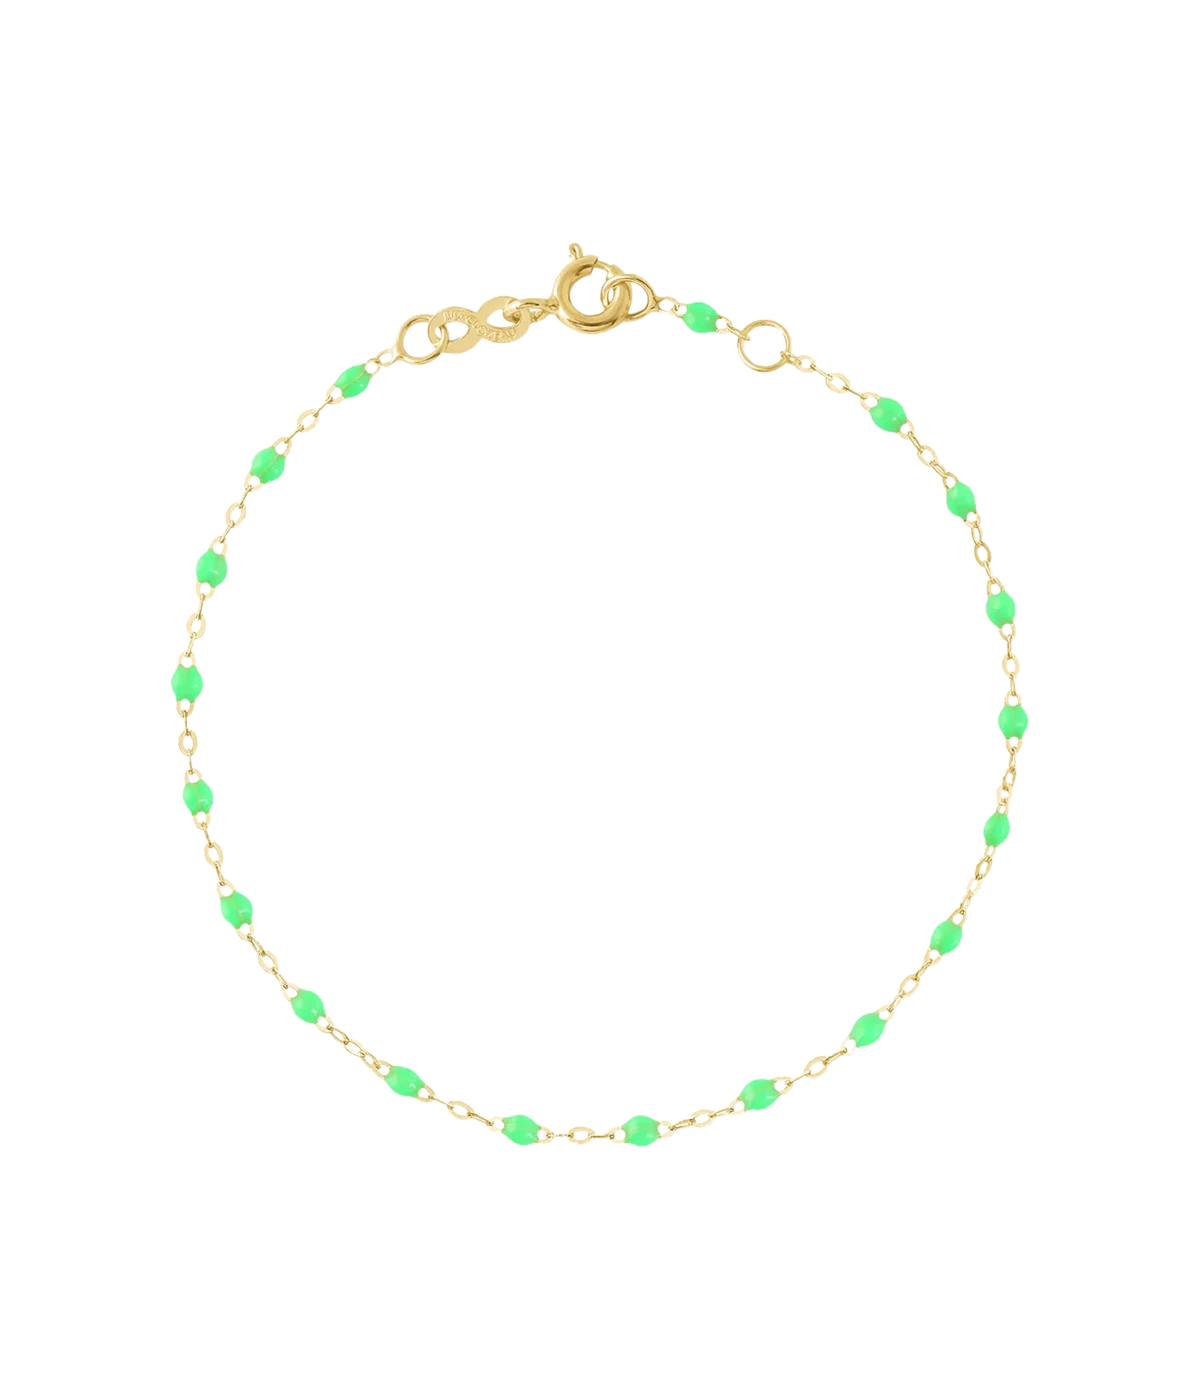 A dainty yellow gold bracelet with neon green resin beads. Handmade in the south of France, this is a perfect gift. Wear everyday, alone or stacked with your favourite pieces. Handmade fine jewellery. 